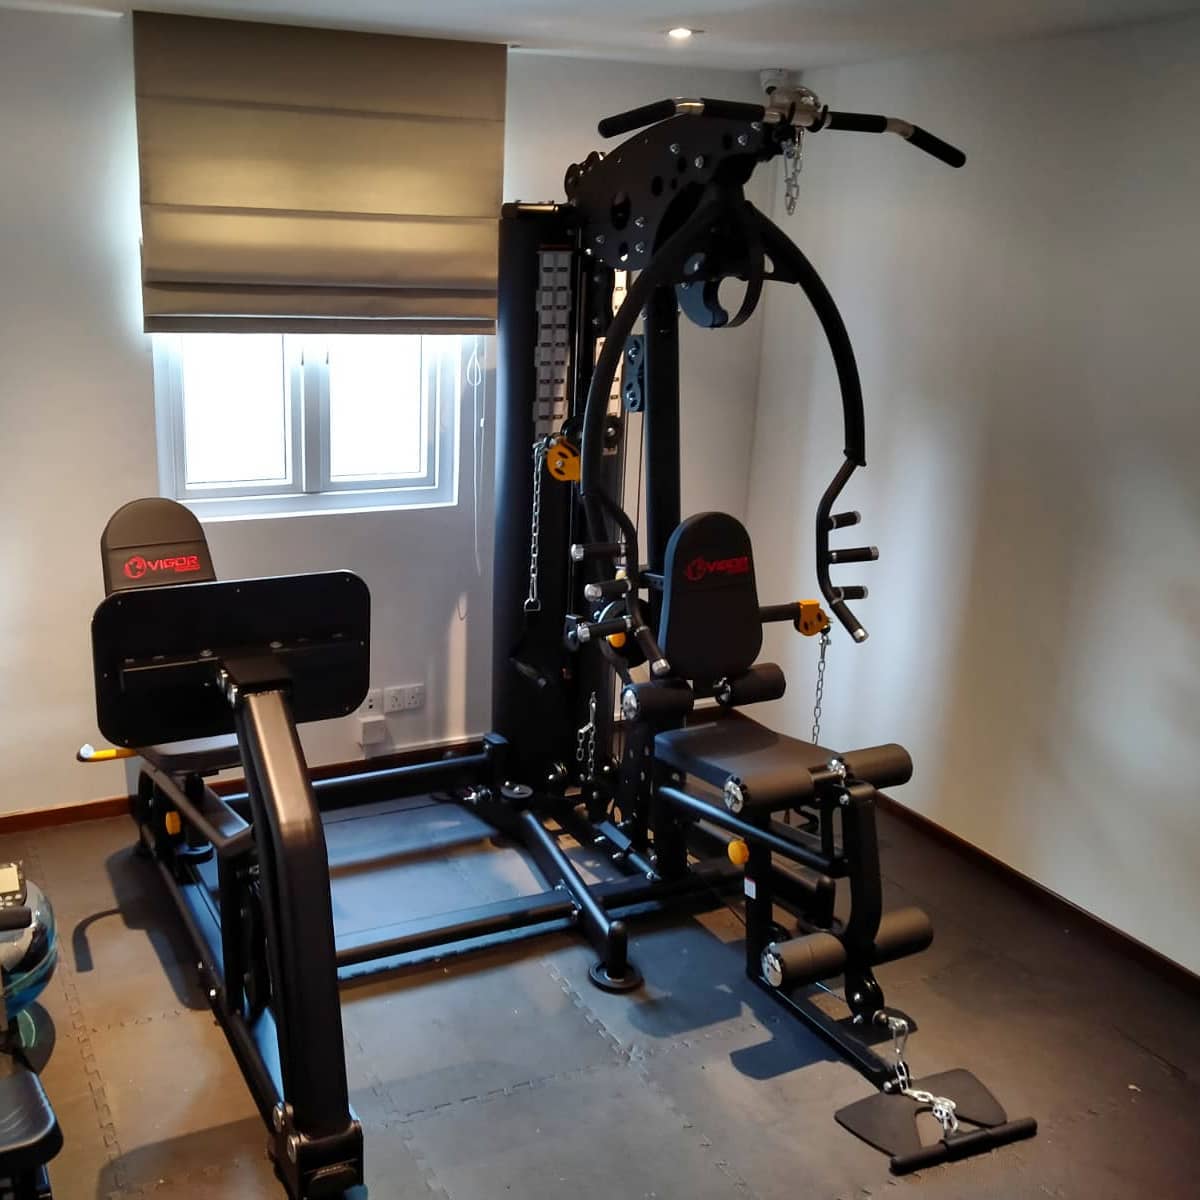 Gym and Fitness Equipment in Singapore - Home Gym Singapore